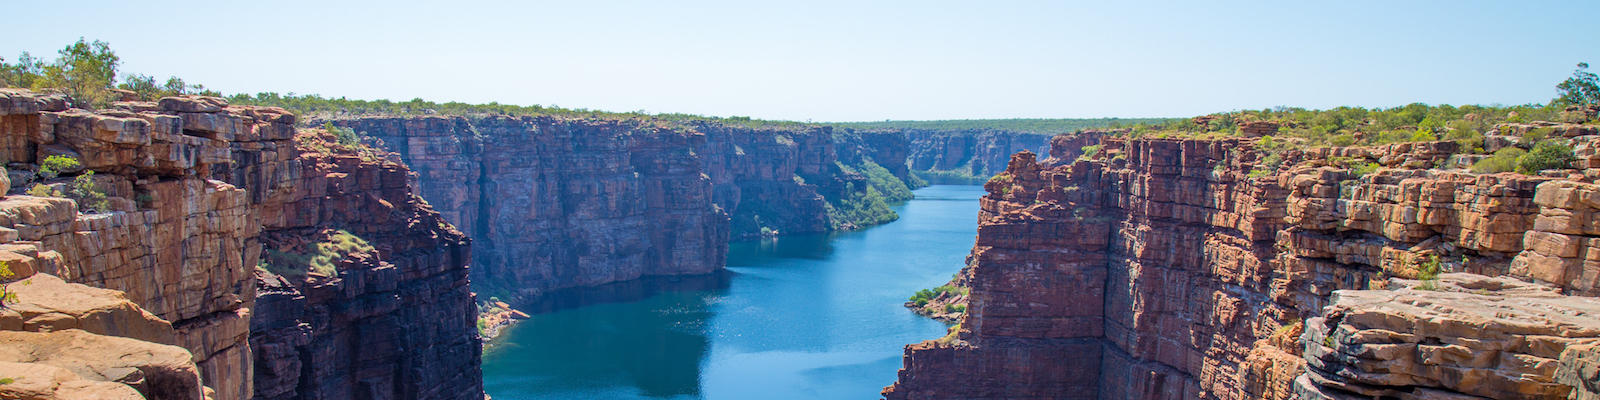 The Kimberley has so much to discover on your next cruise.